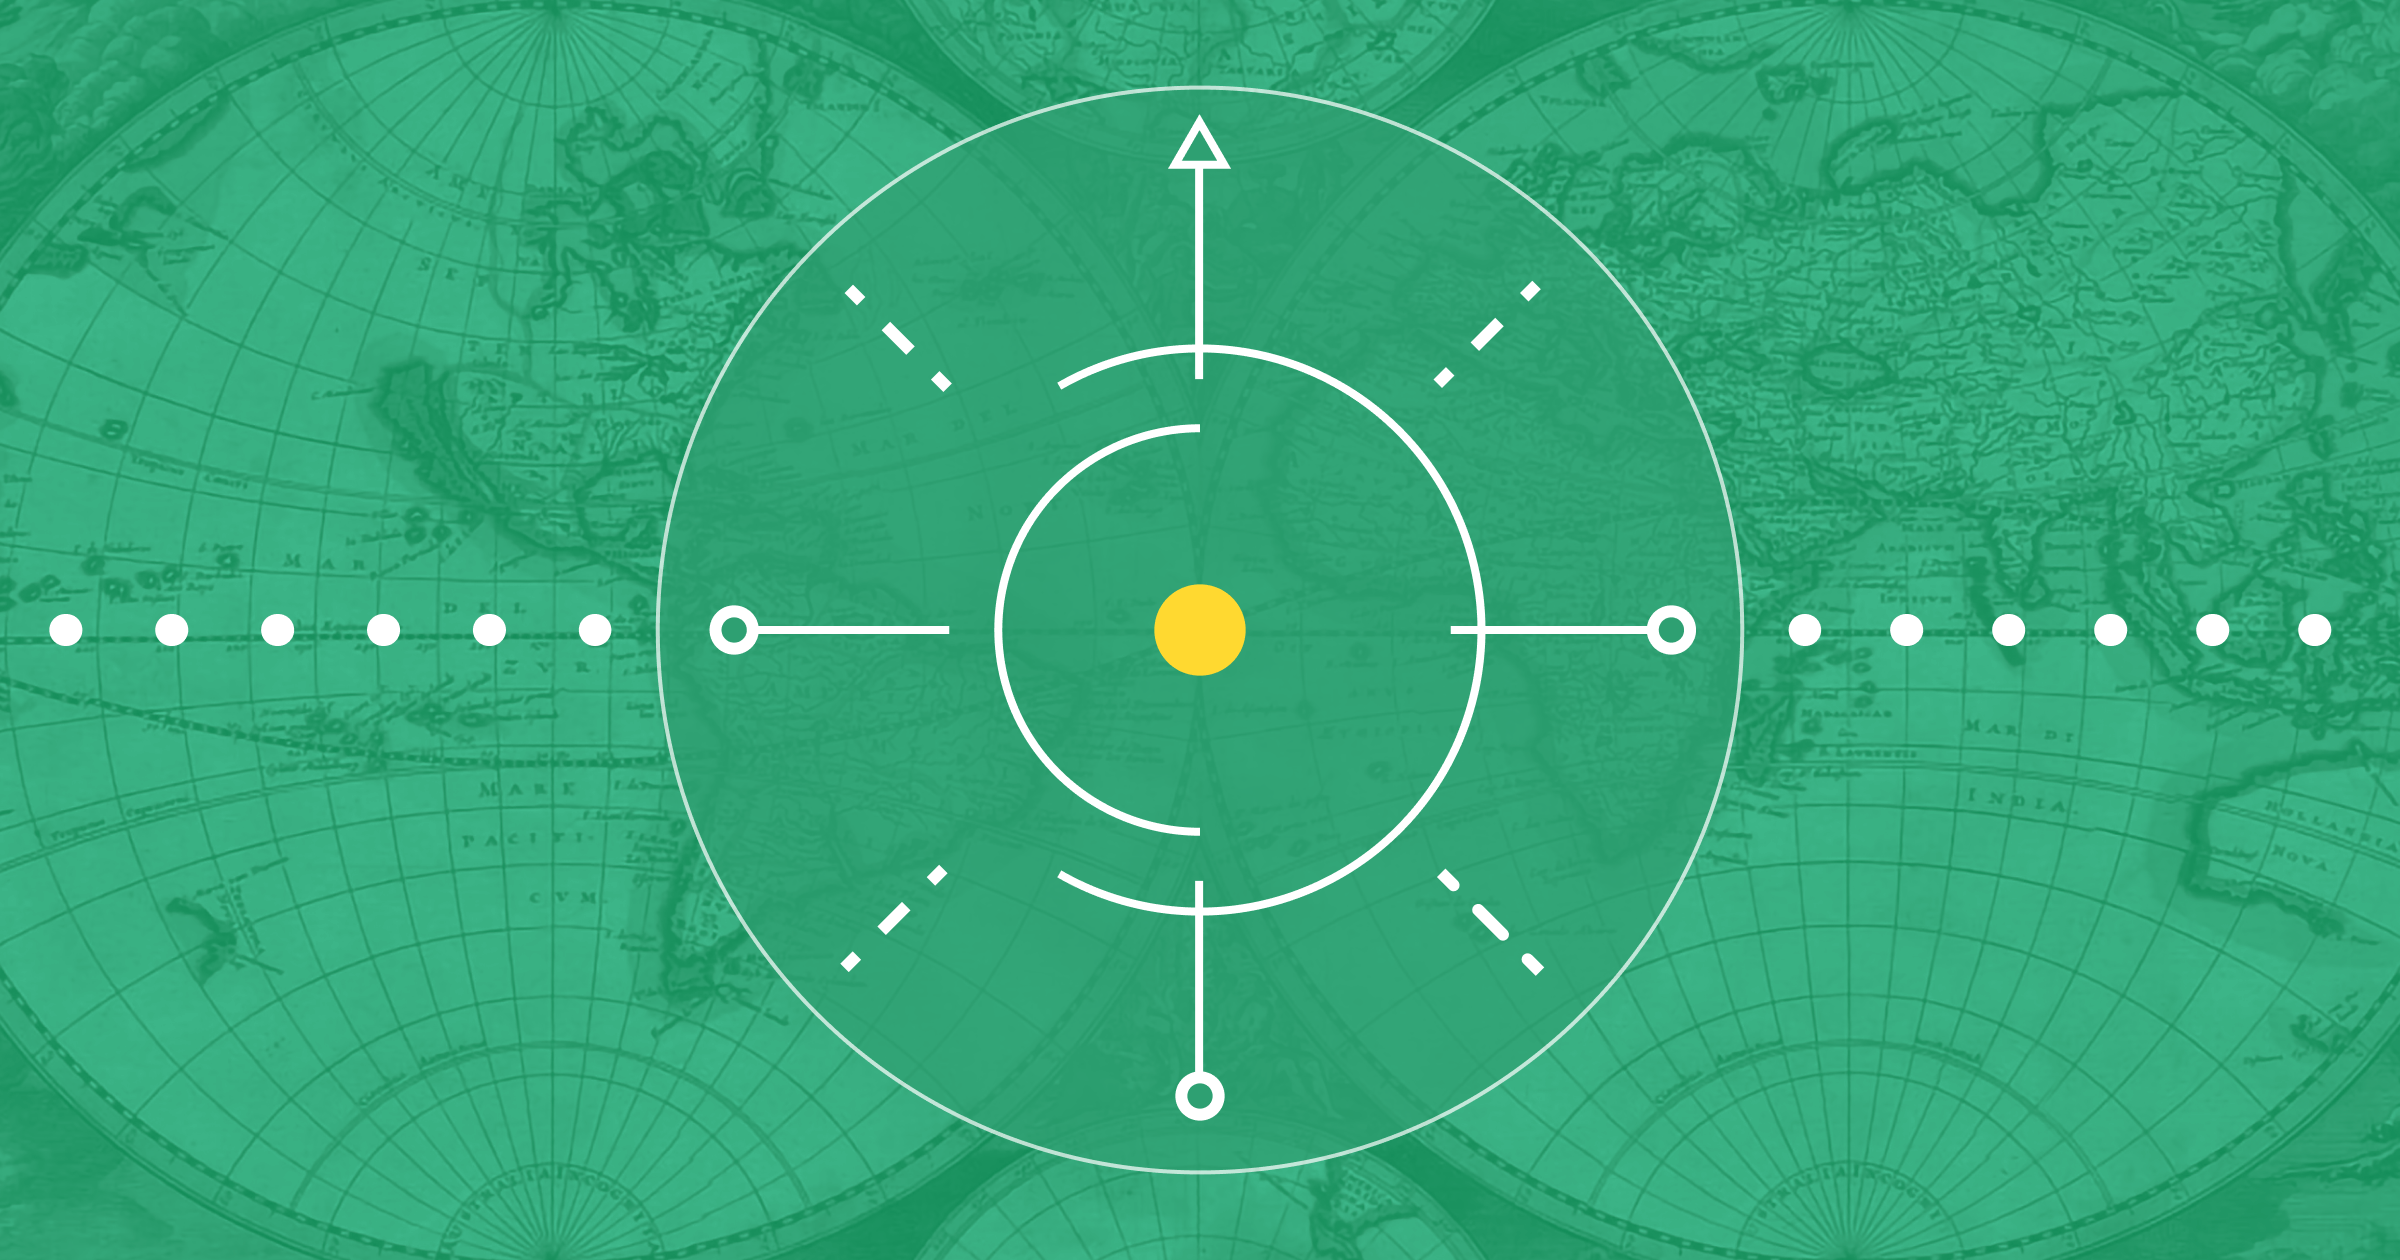 Old world map against a green background, overlaid with a compass-like design